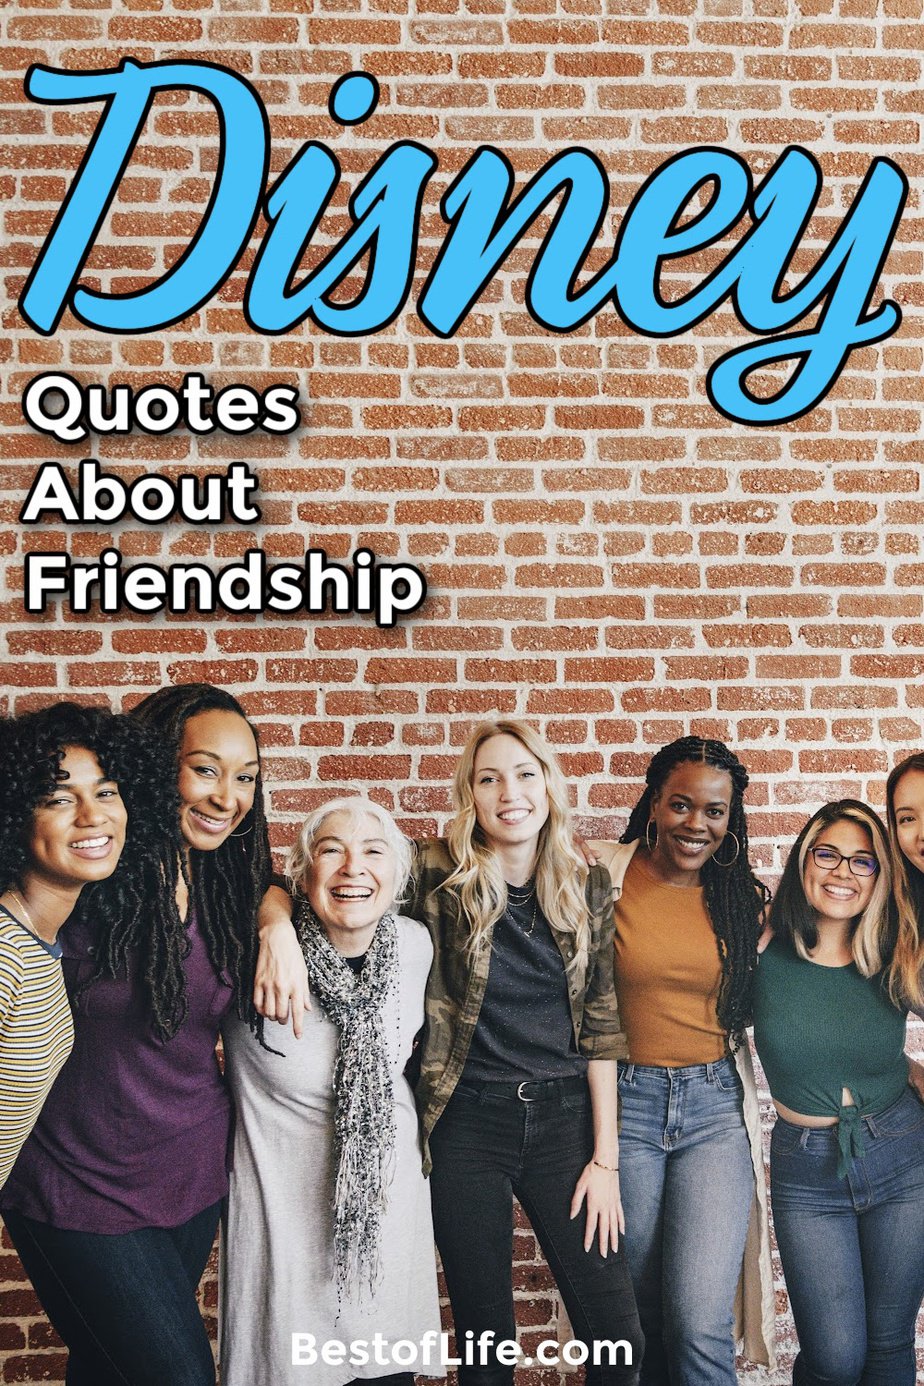 It’s easy to find Disney quotes about friendship in everything they do. From books to movies, songs to theme park rides, the inspiration is everywhere. Disney Quotes | Best Disney Quotes | Friendship Quotes | Quotes About Friendship | Best Friendship Quotes | Motivational Quotes #disney #friendship #disneyland #disneyworld #quotes via @thebestoflife